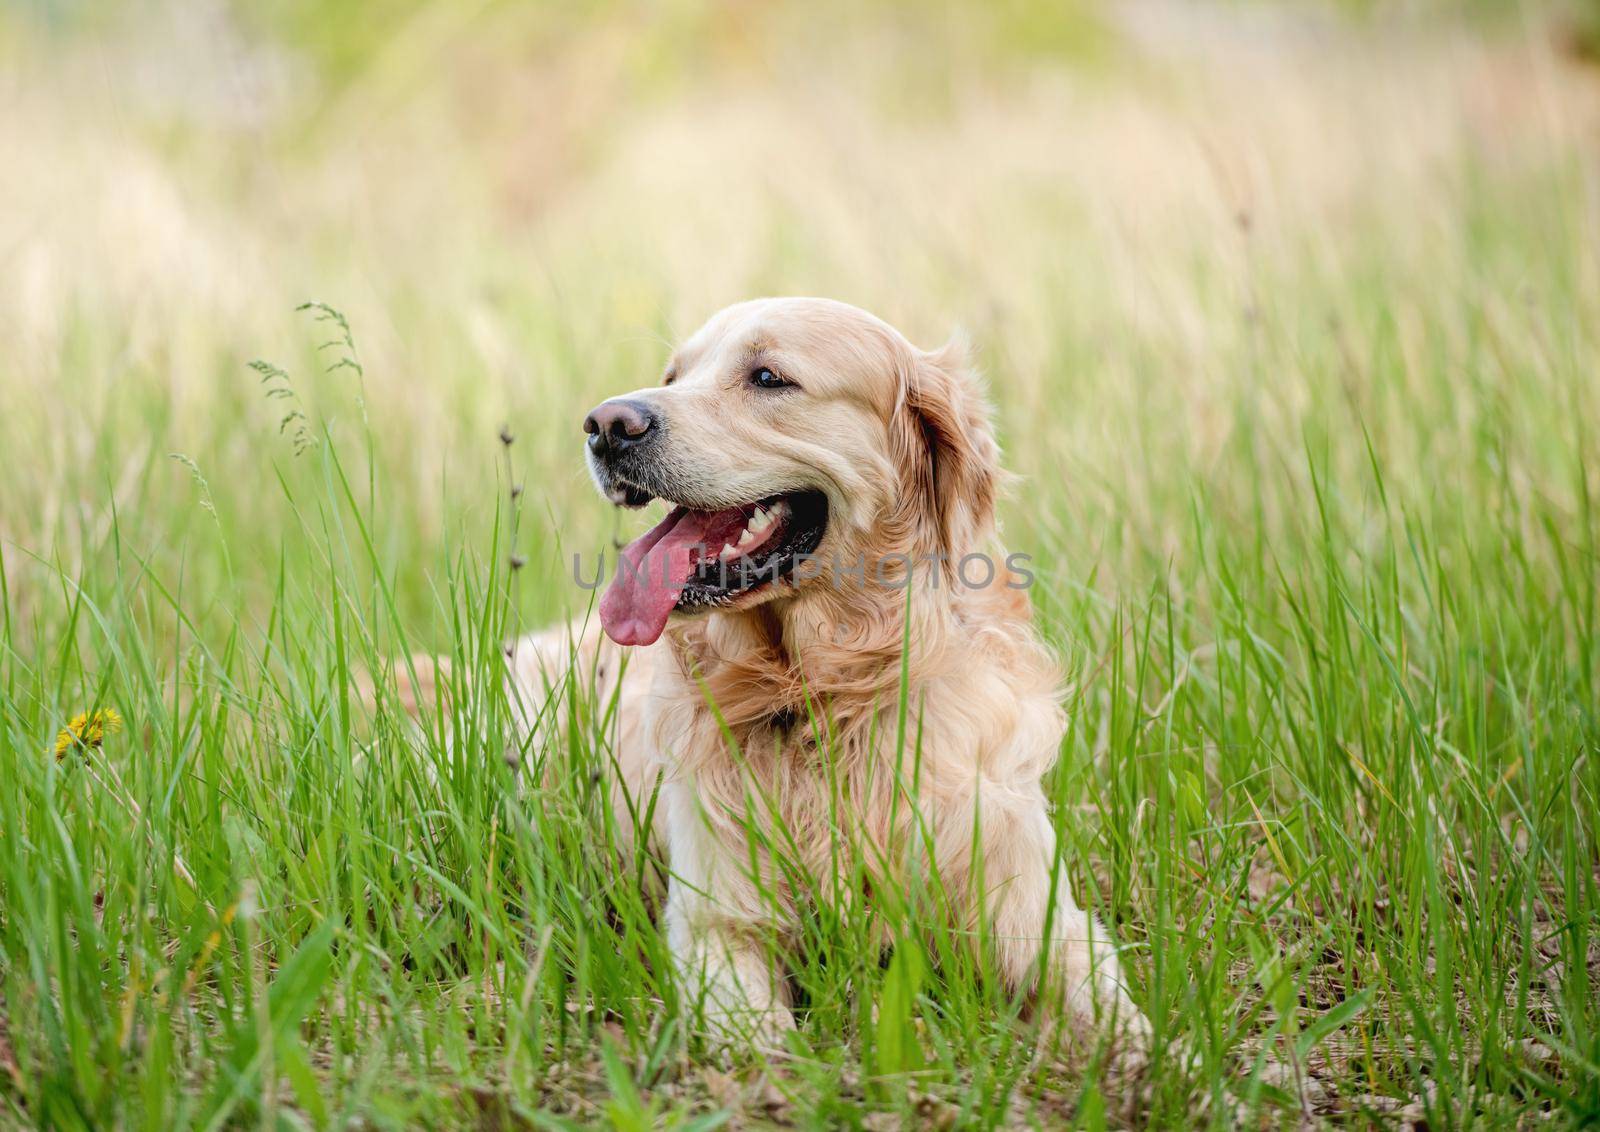 Golden retriever dog lying in green grass outdoors in sunny summer day and looking back with tonque out. Adorable doggy pet resting during walk outside